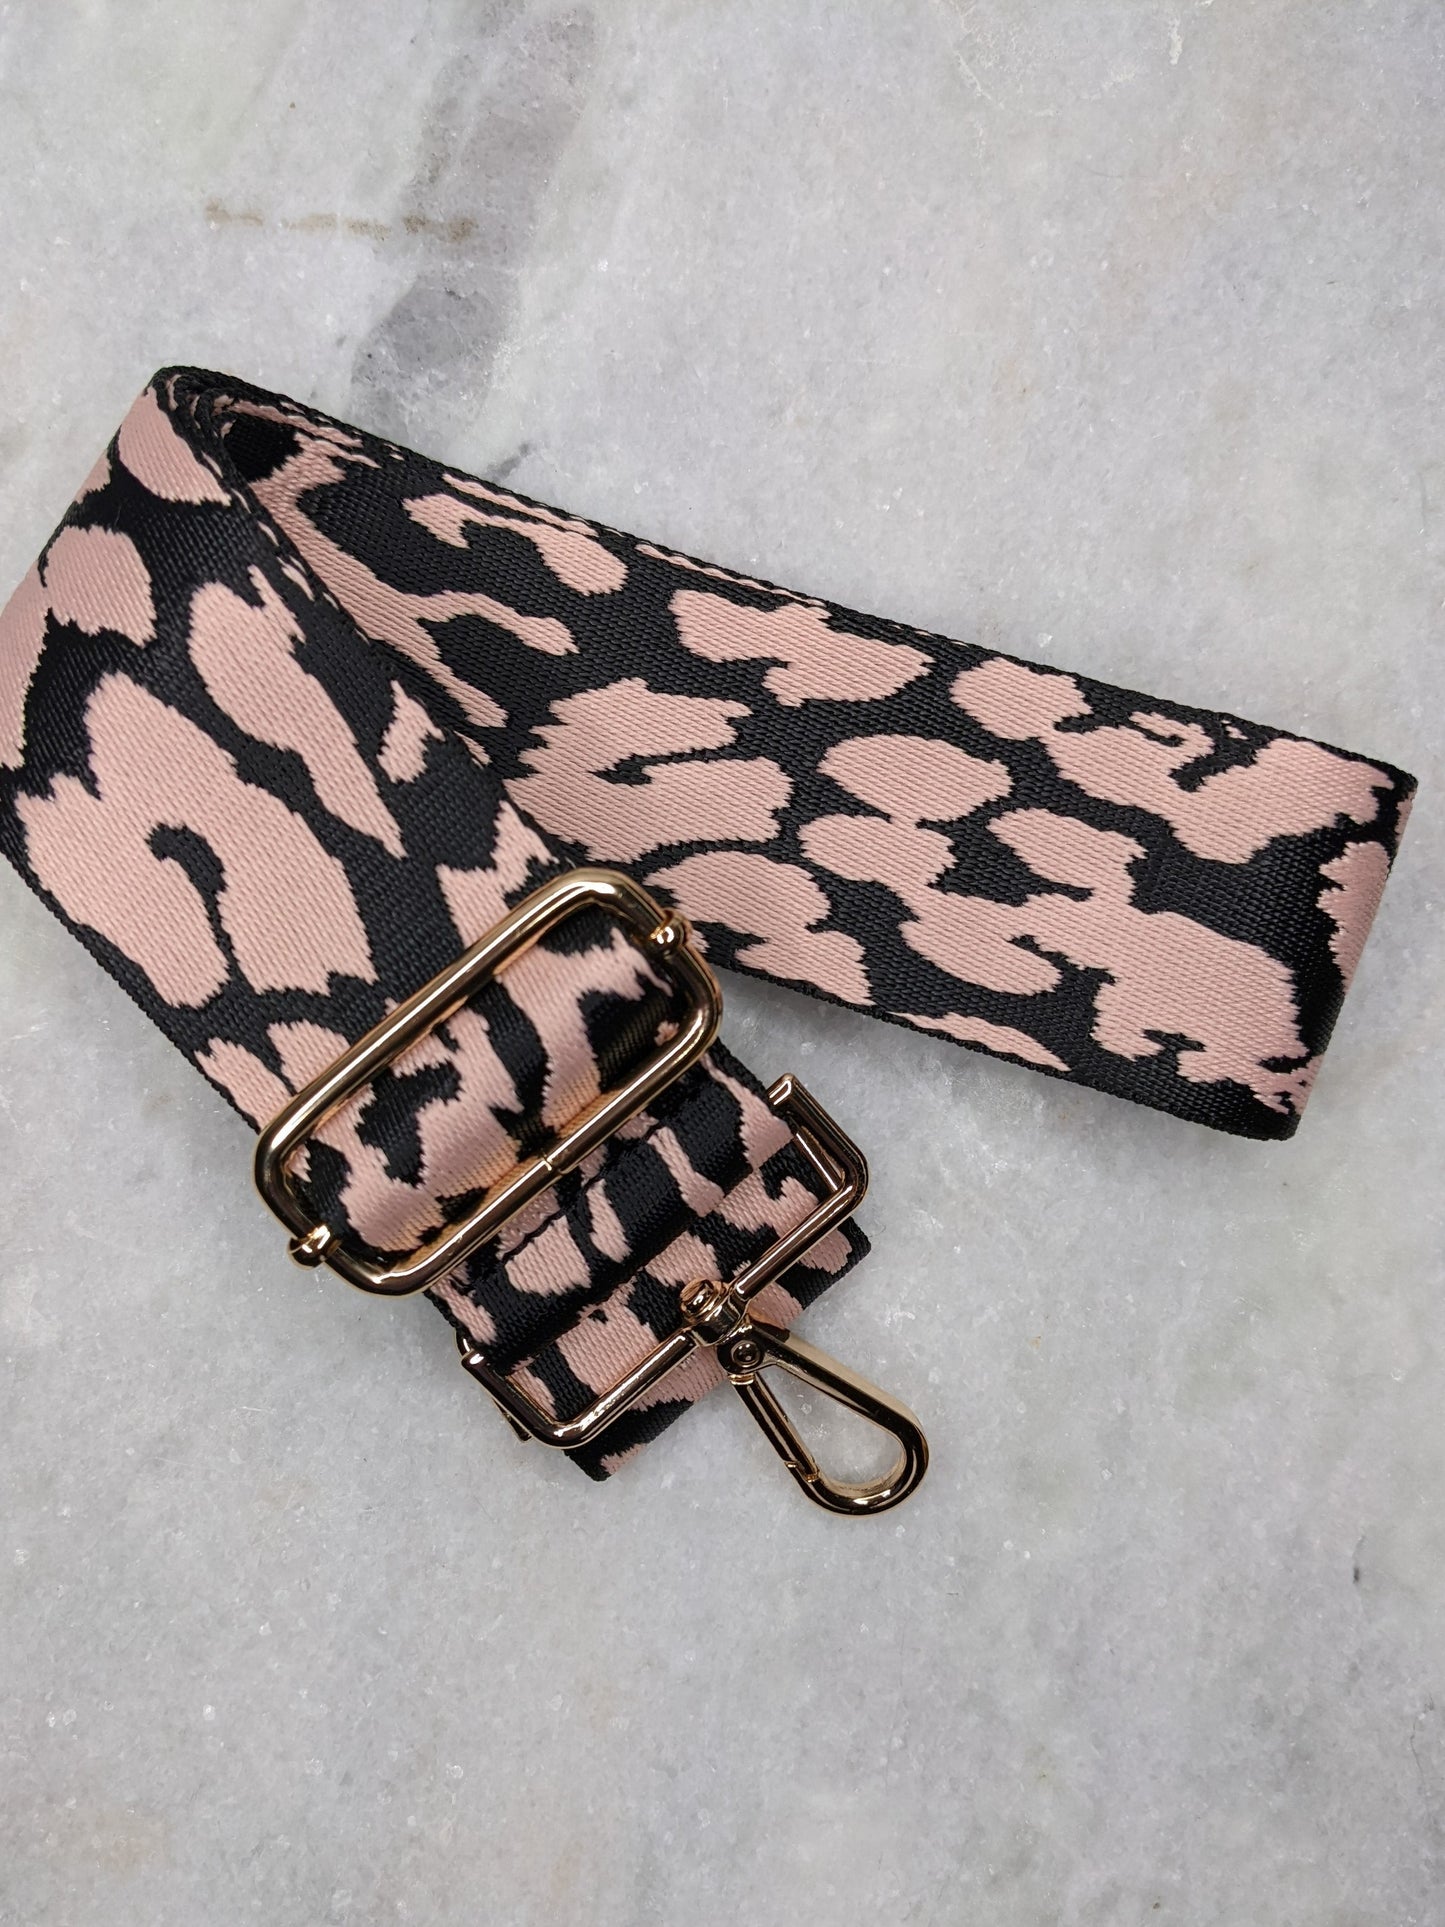 CTHRU Purses Pink and Black Cheetah Print Purse Strap with Gold Accents NWOT